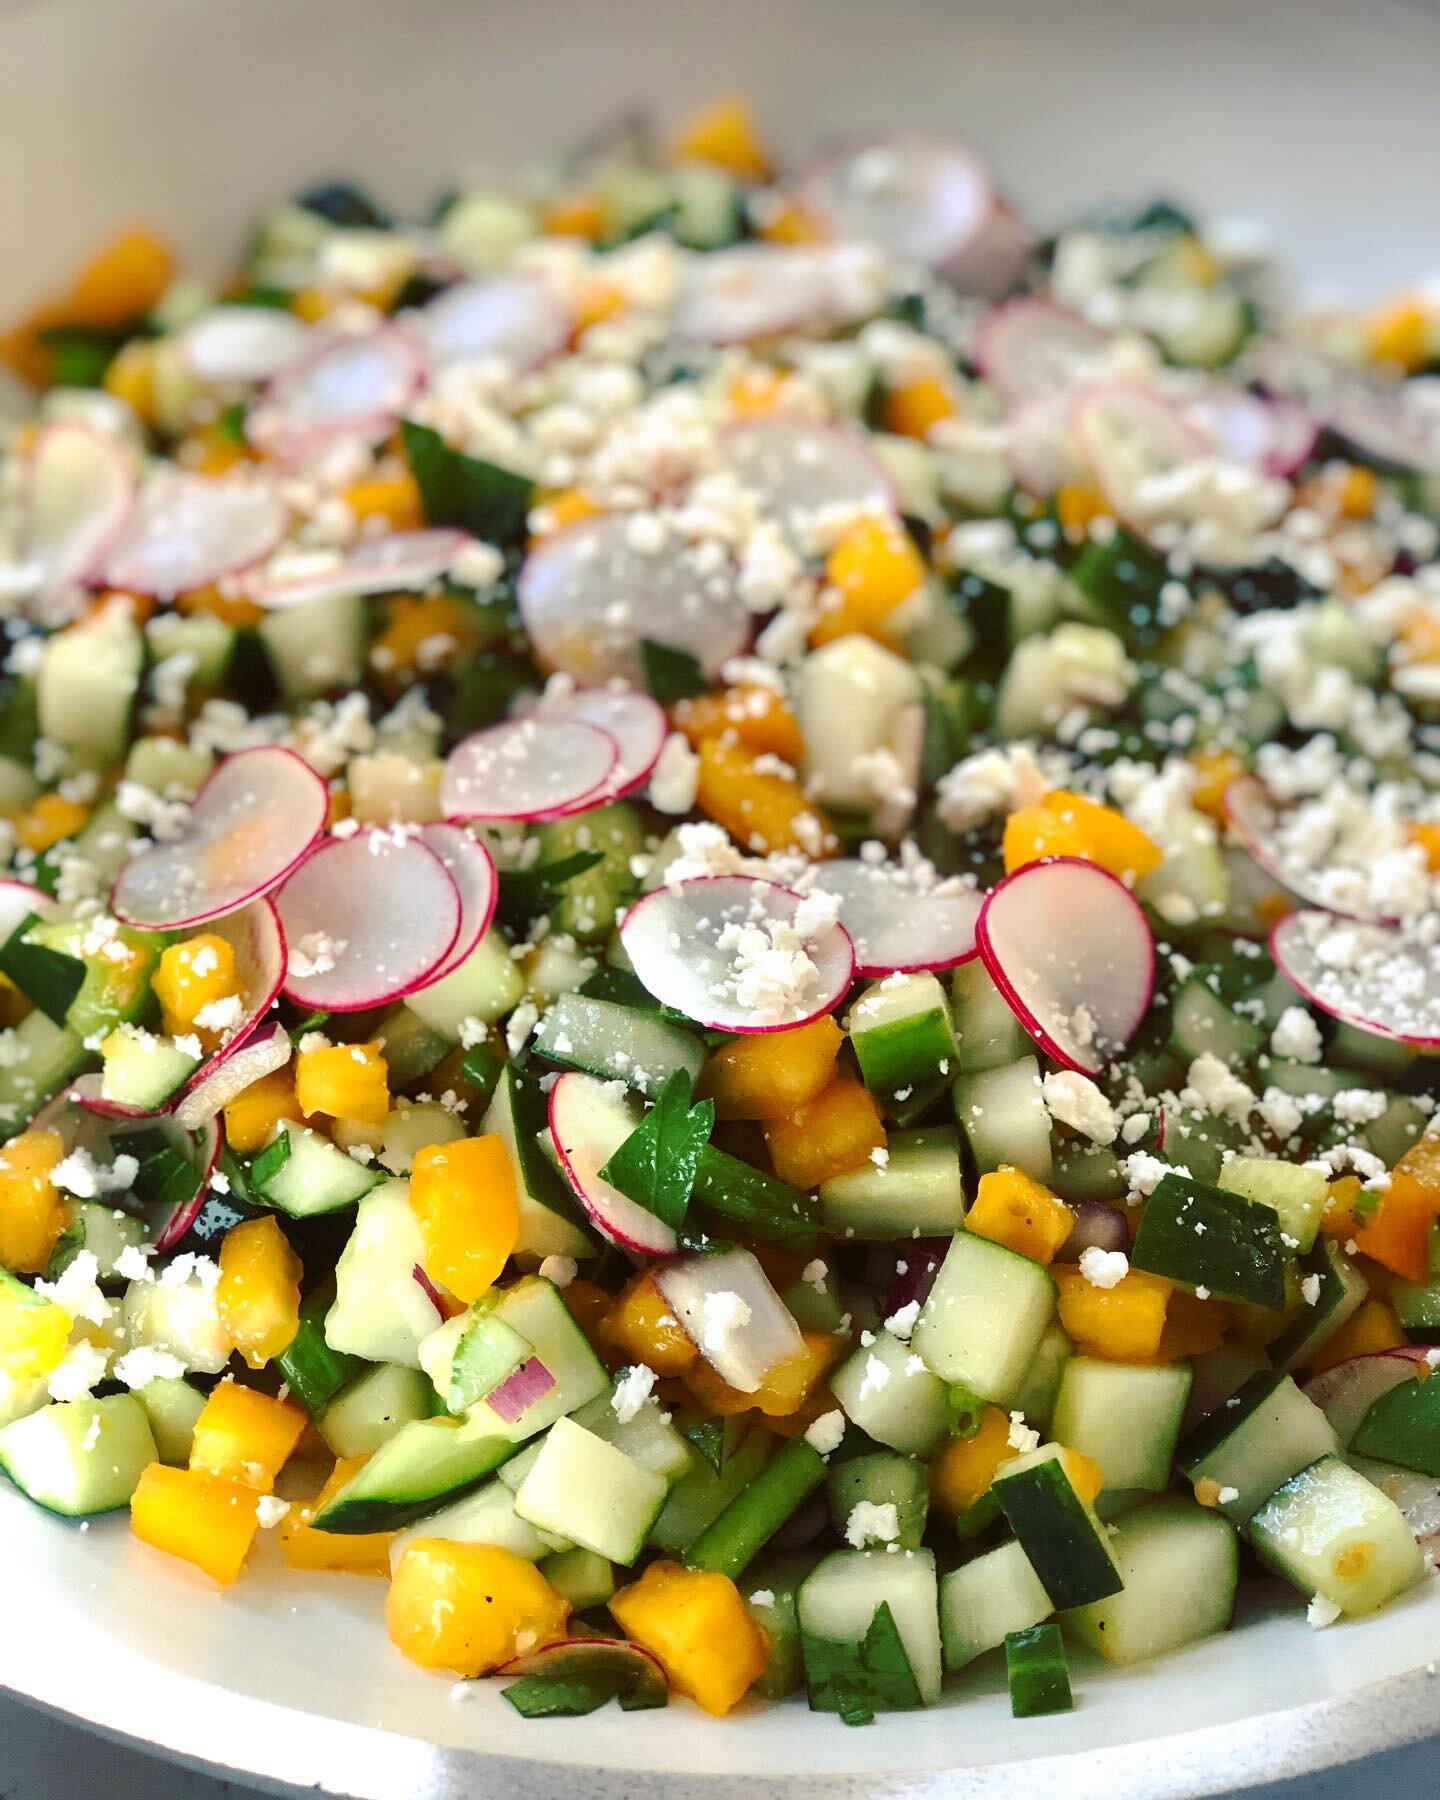 It&rsquo;s a sunny salad for a sunny day.... this riff on a classic Israeli-style chopped salad includes the last of summer&rsquo;s sweet yellow beefsteak tomatoes, crunchy cucumbers, radish and creamy feta with a zippy lemon-herb dressing. On the co